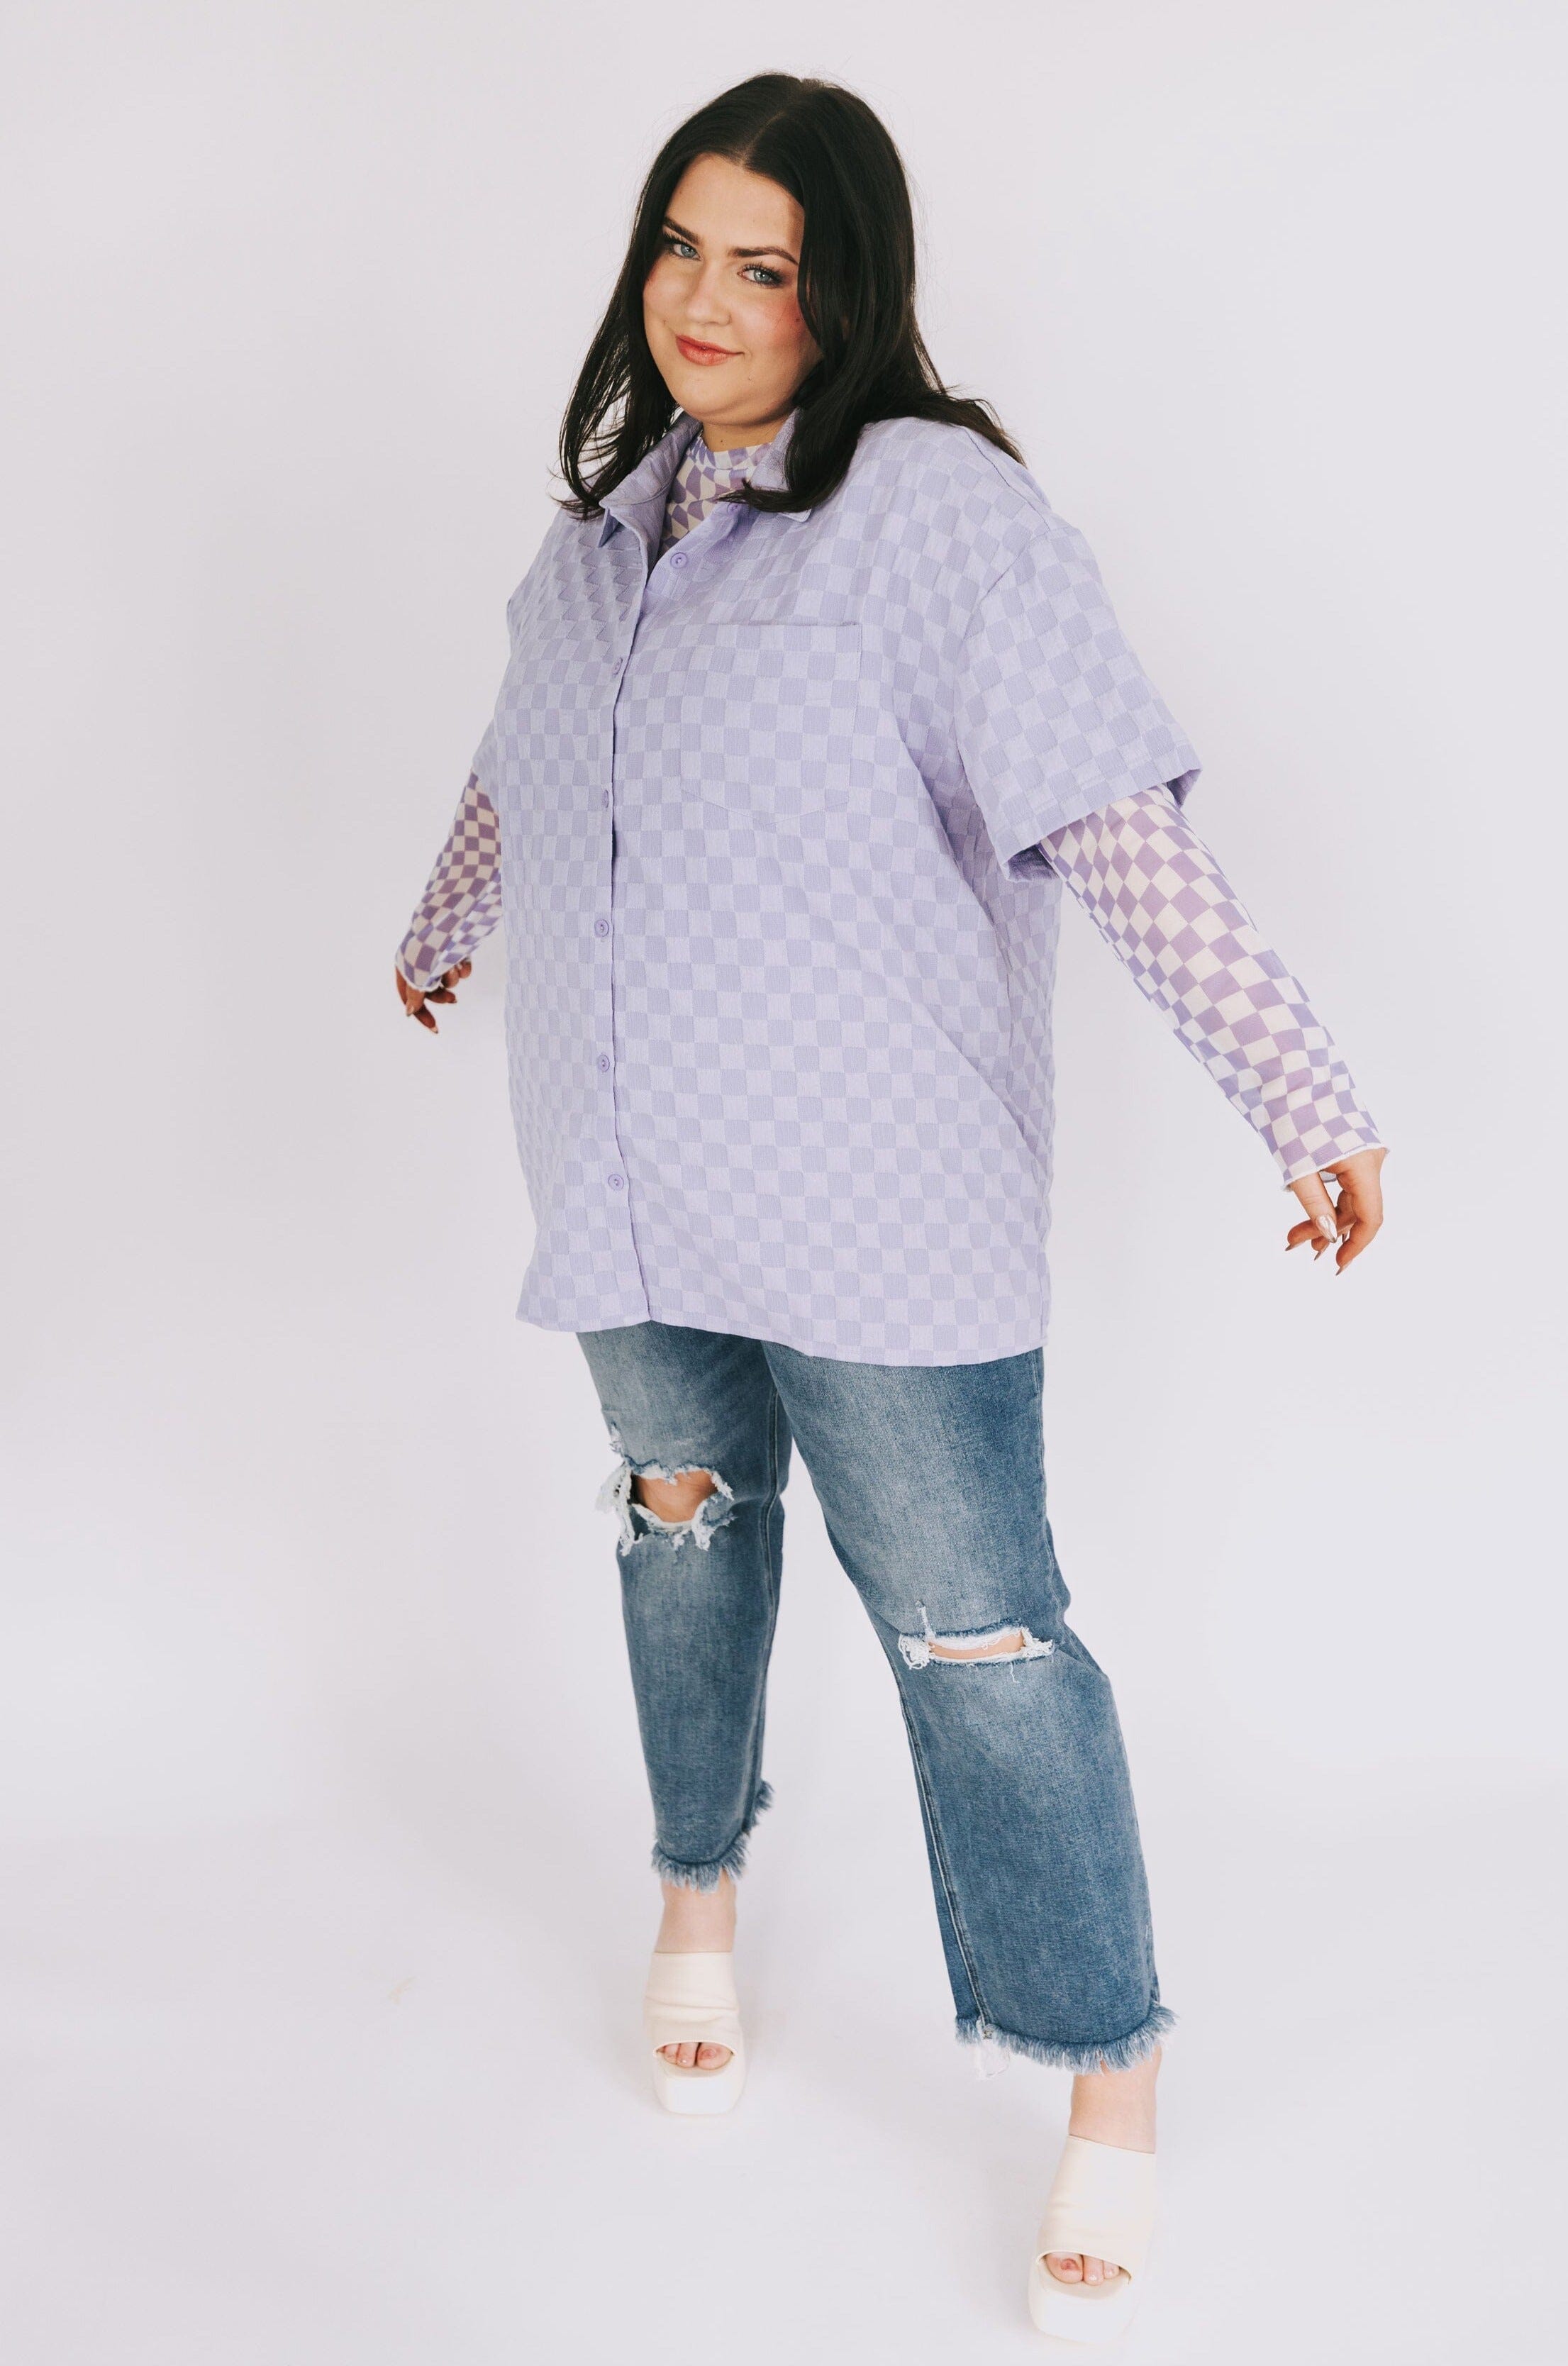 PLUS SIZE - Take It All Back Top - 2 Colors!